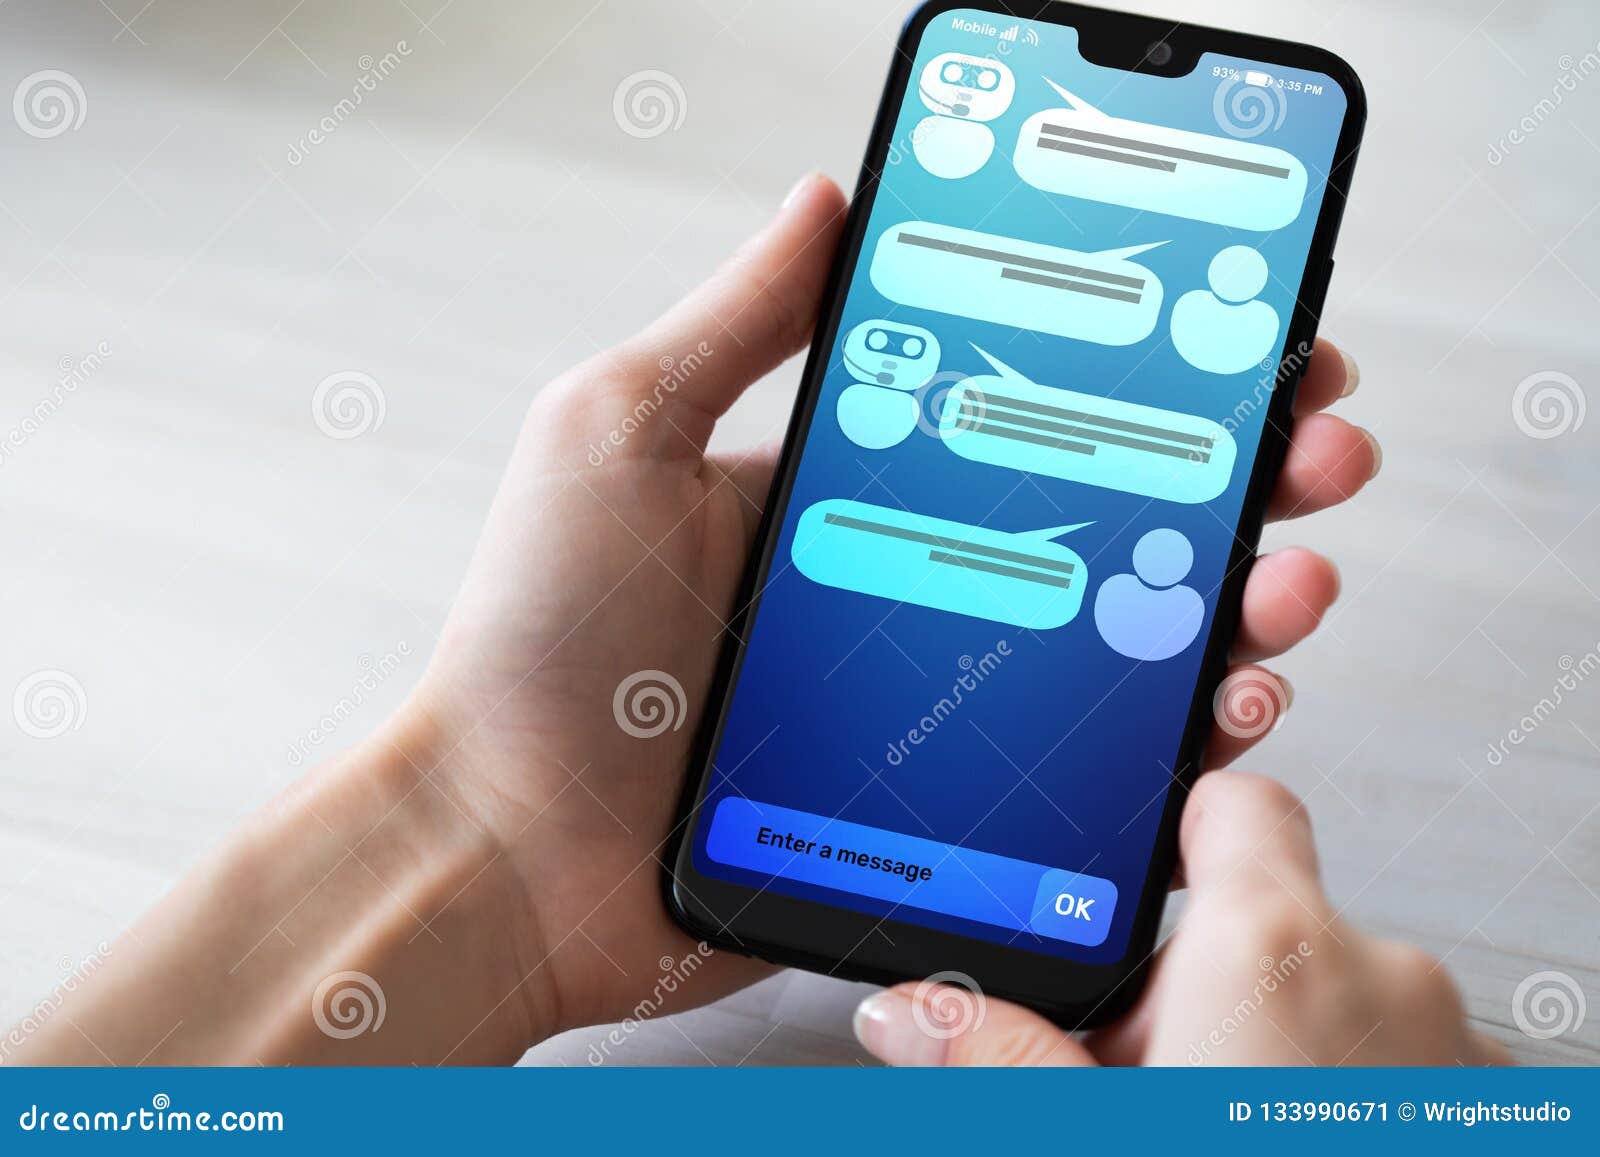 customer and chatbot dialog on smartphone screen. ai. artificial intelligence and service automation technology concept.